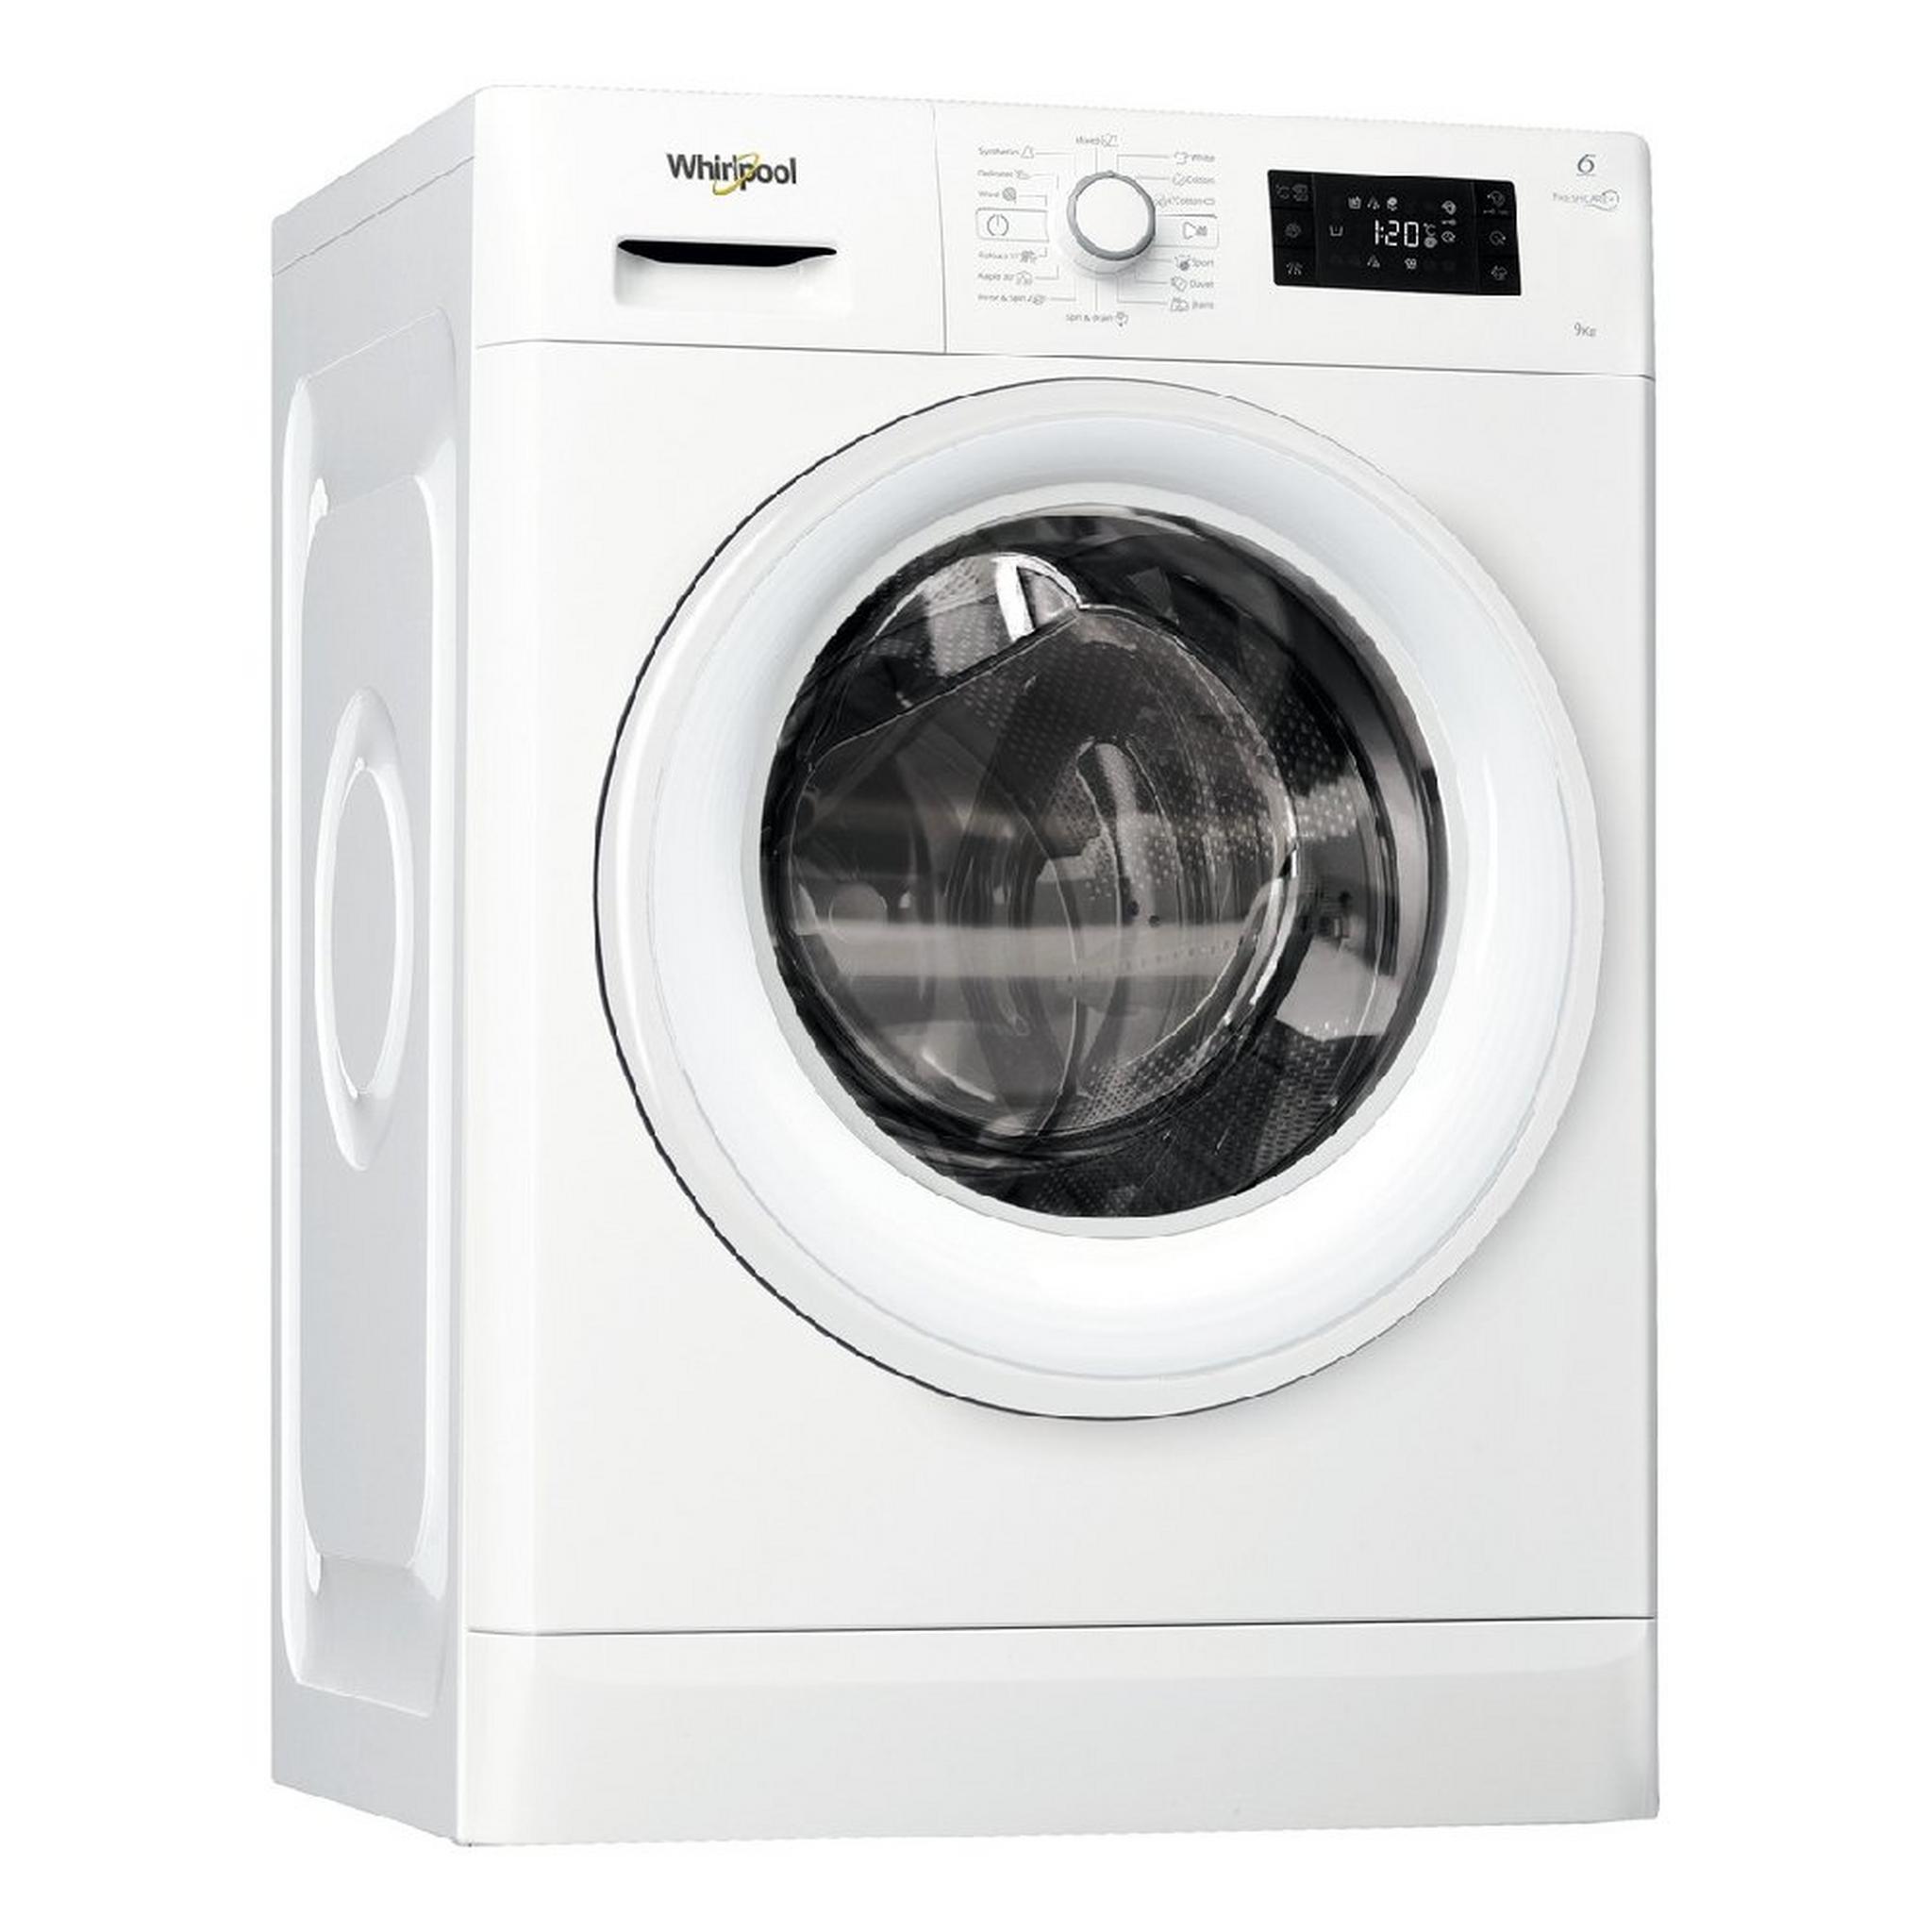 Whirlpool FWG91284W front load washer 9KG - White